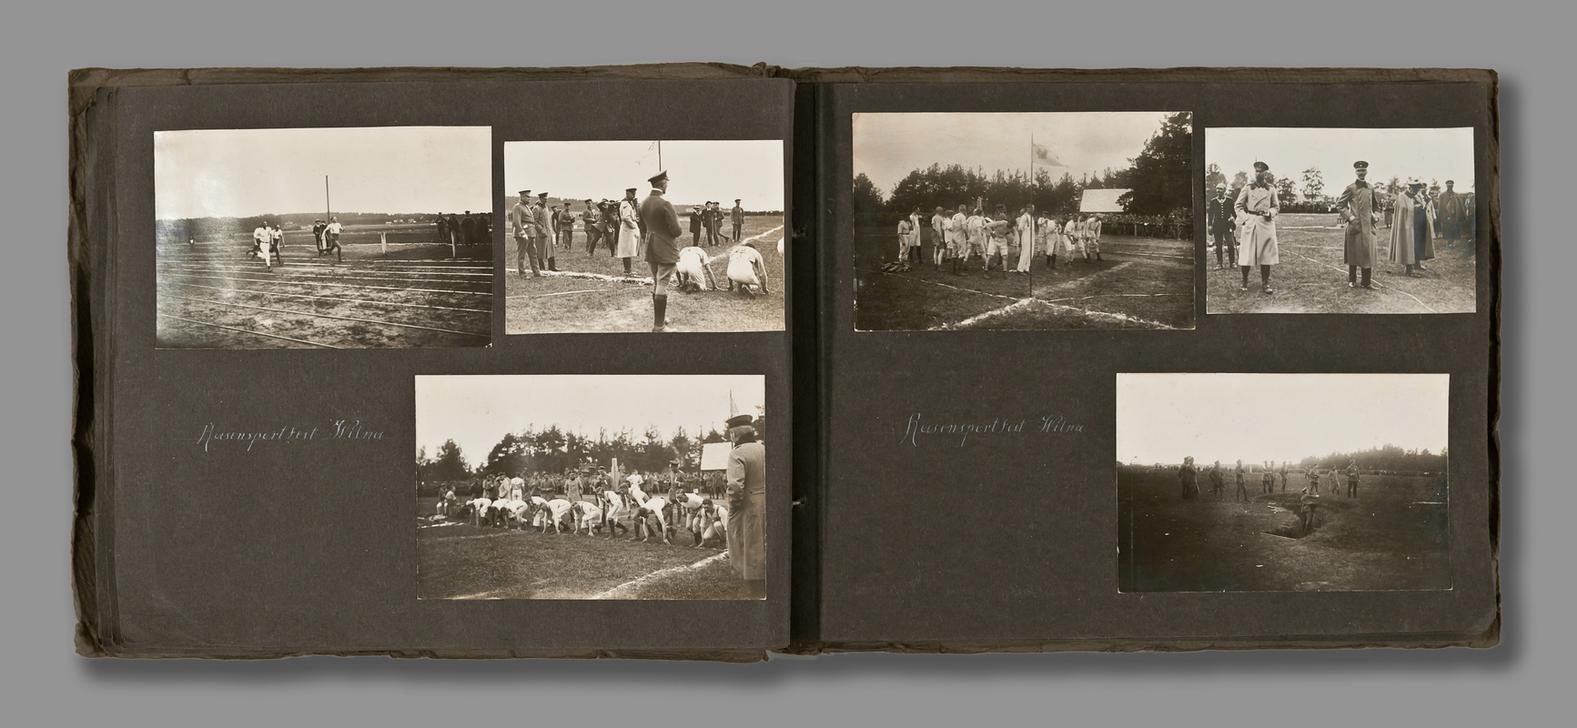 AKG2004362 From an album with photographs taken by a German soldier in Lithuania and Poland in 1916 ©akg-images